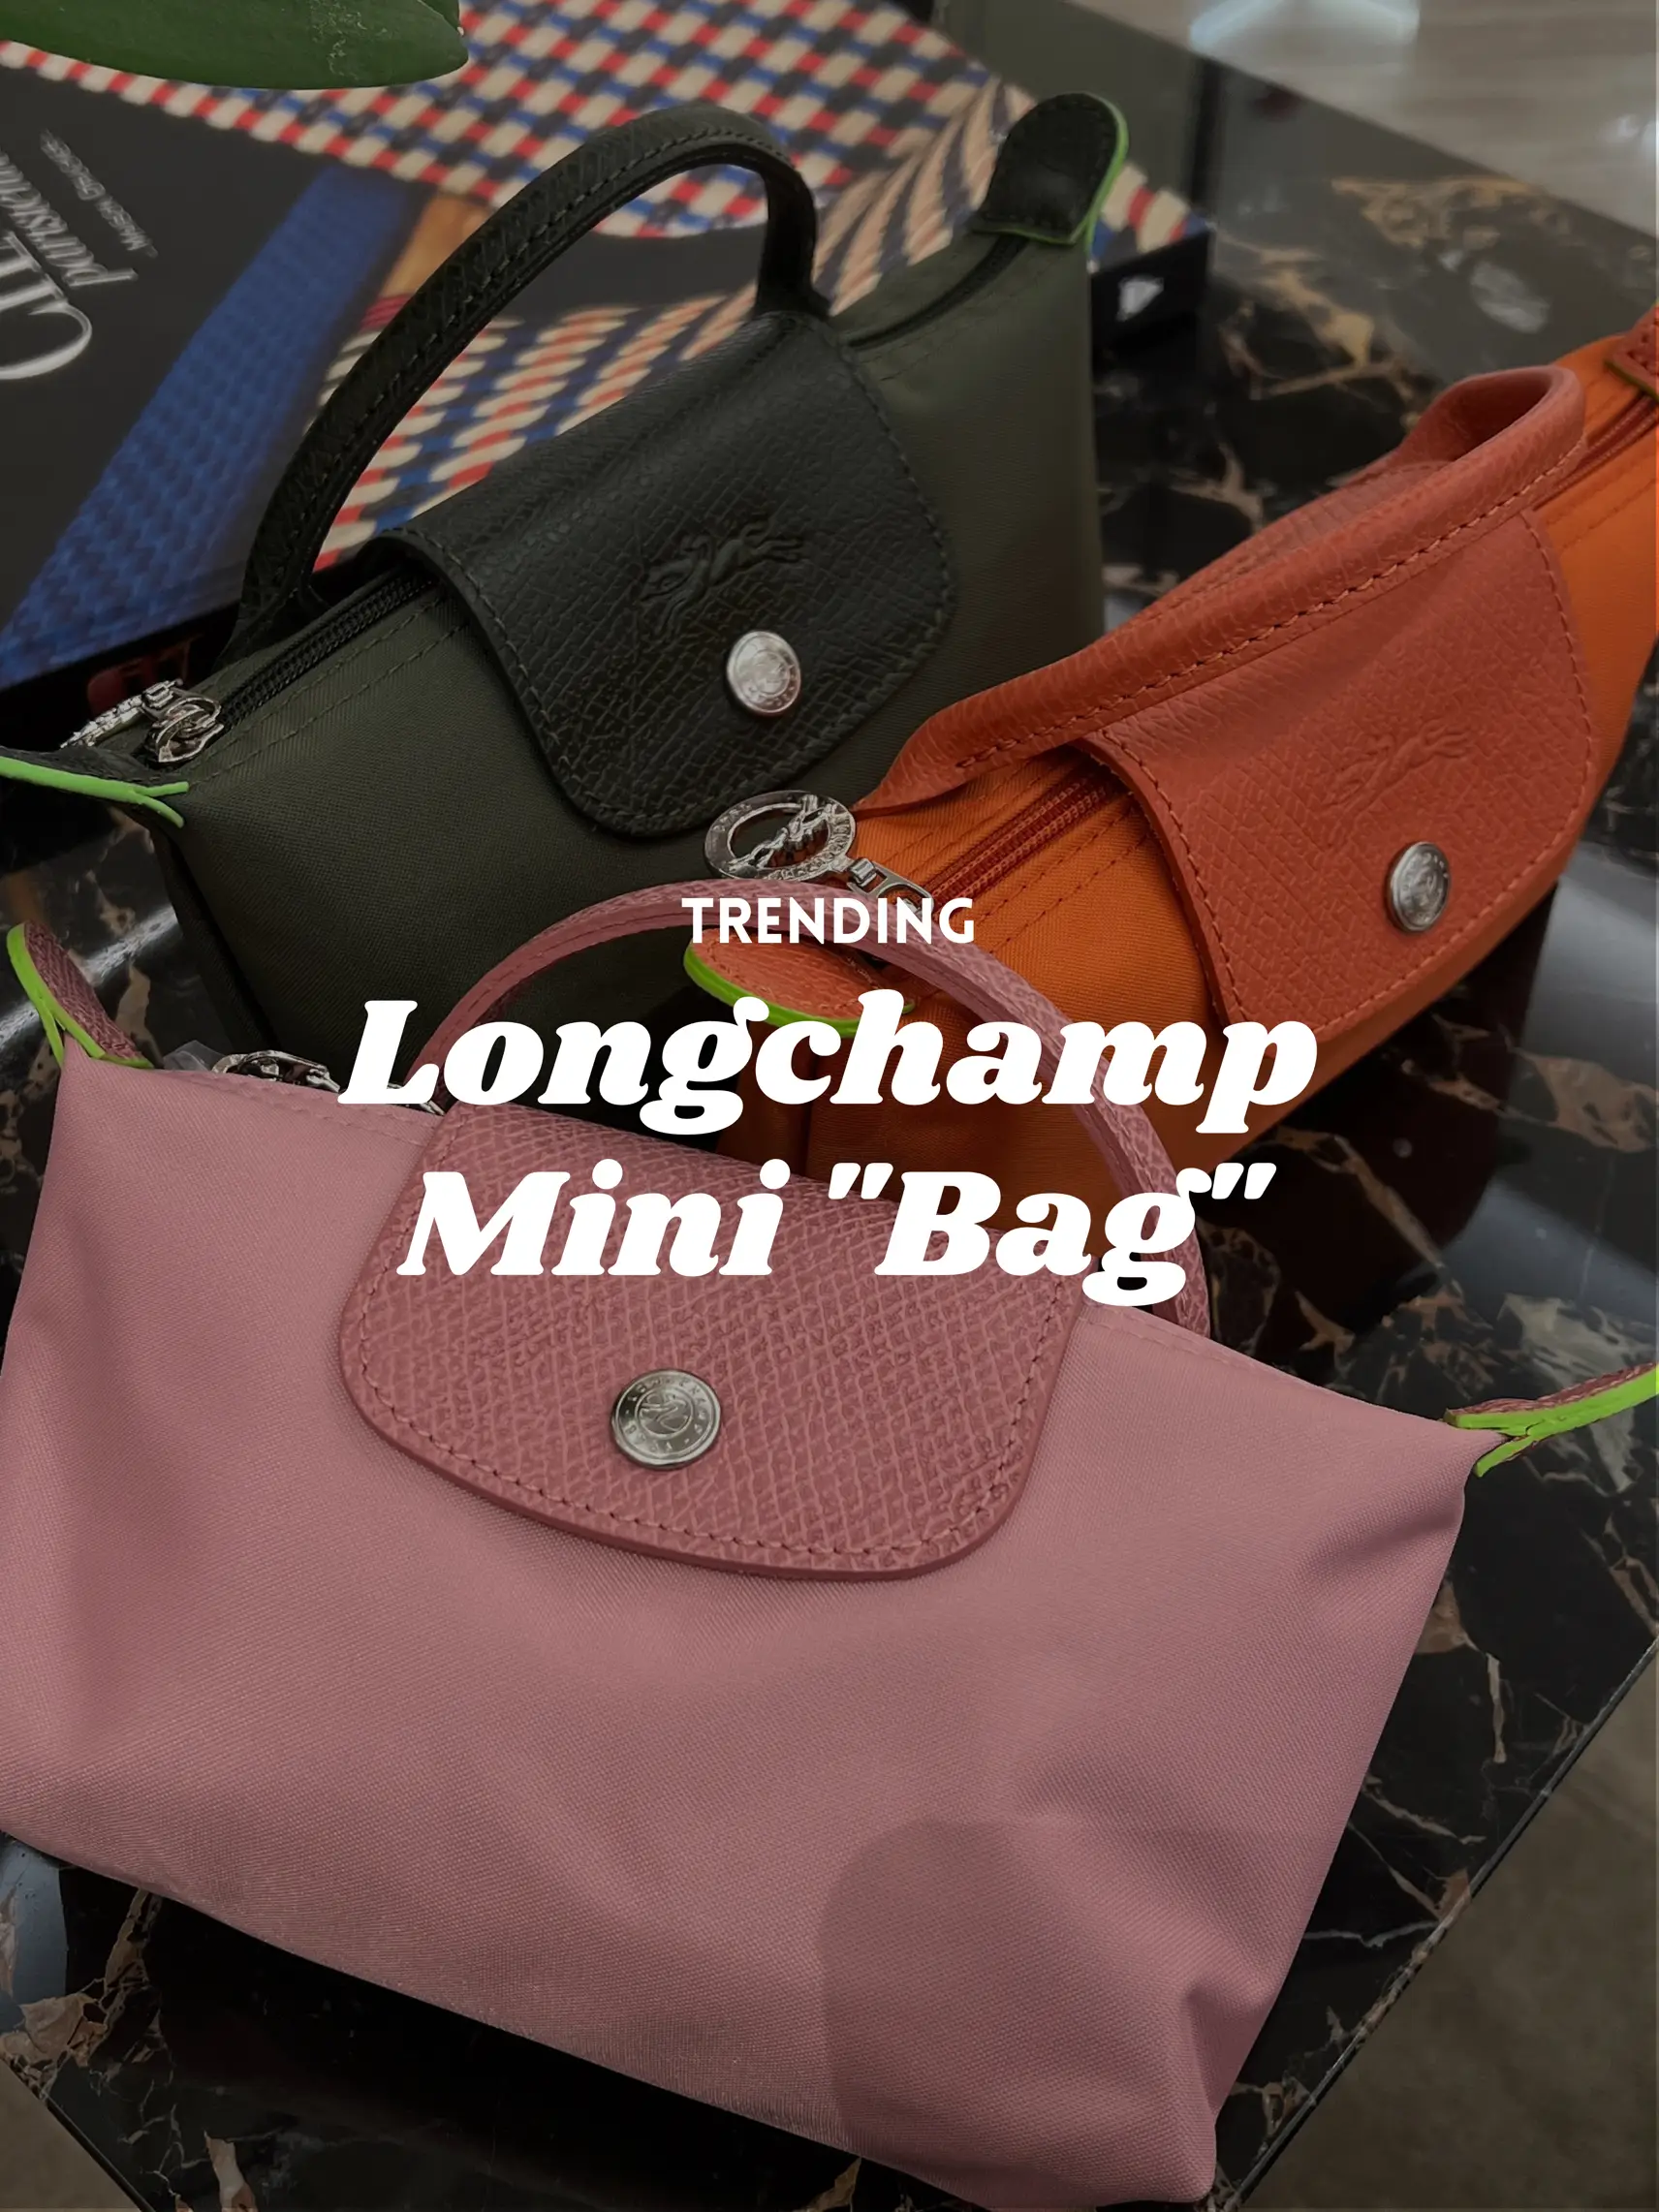 Longchamp's Latest Collection Features Ultra-Chic Mini Bags For